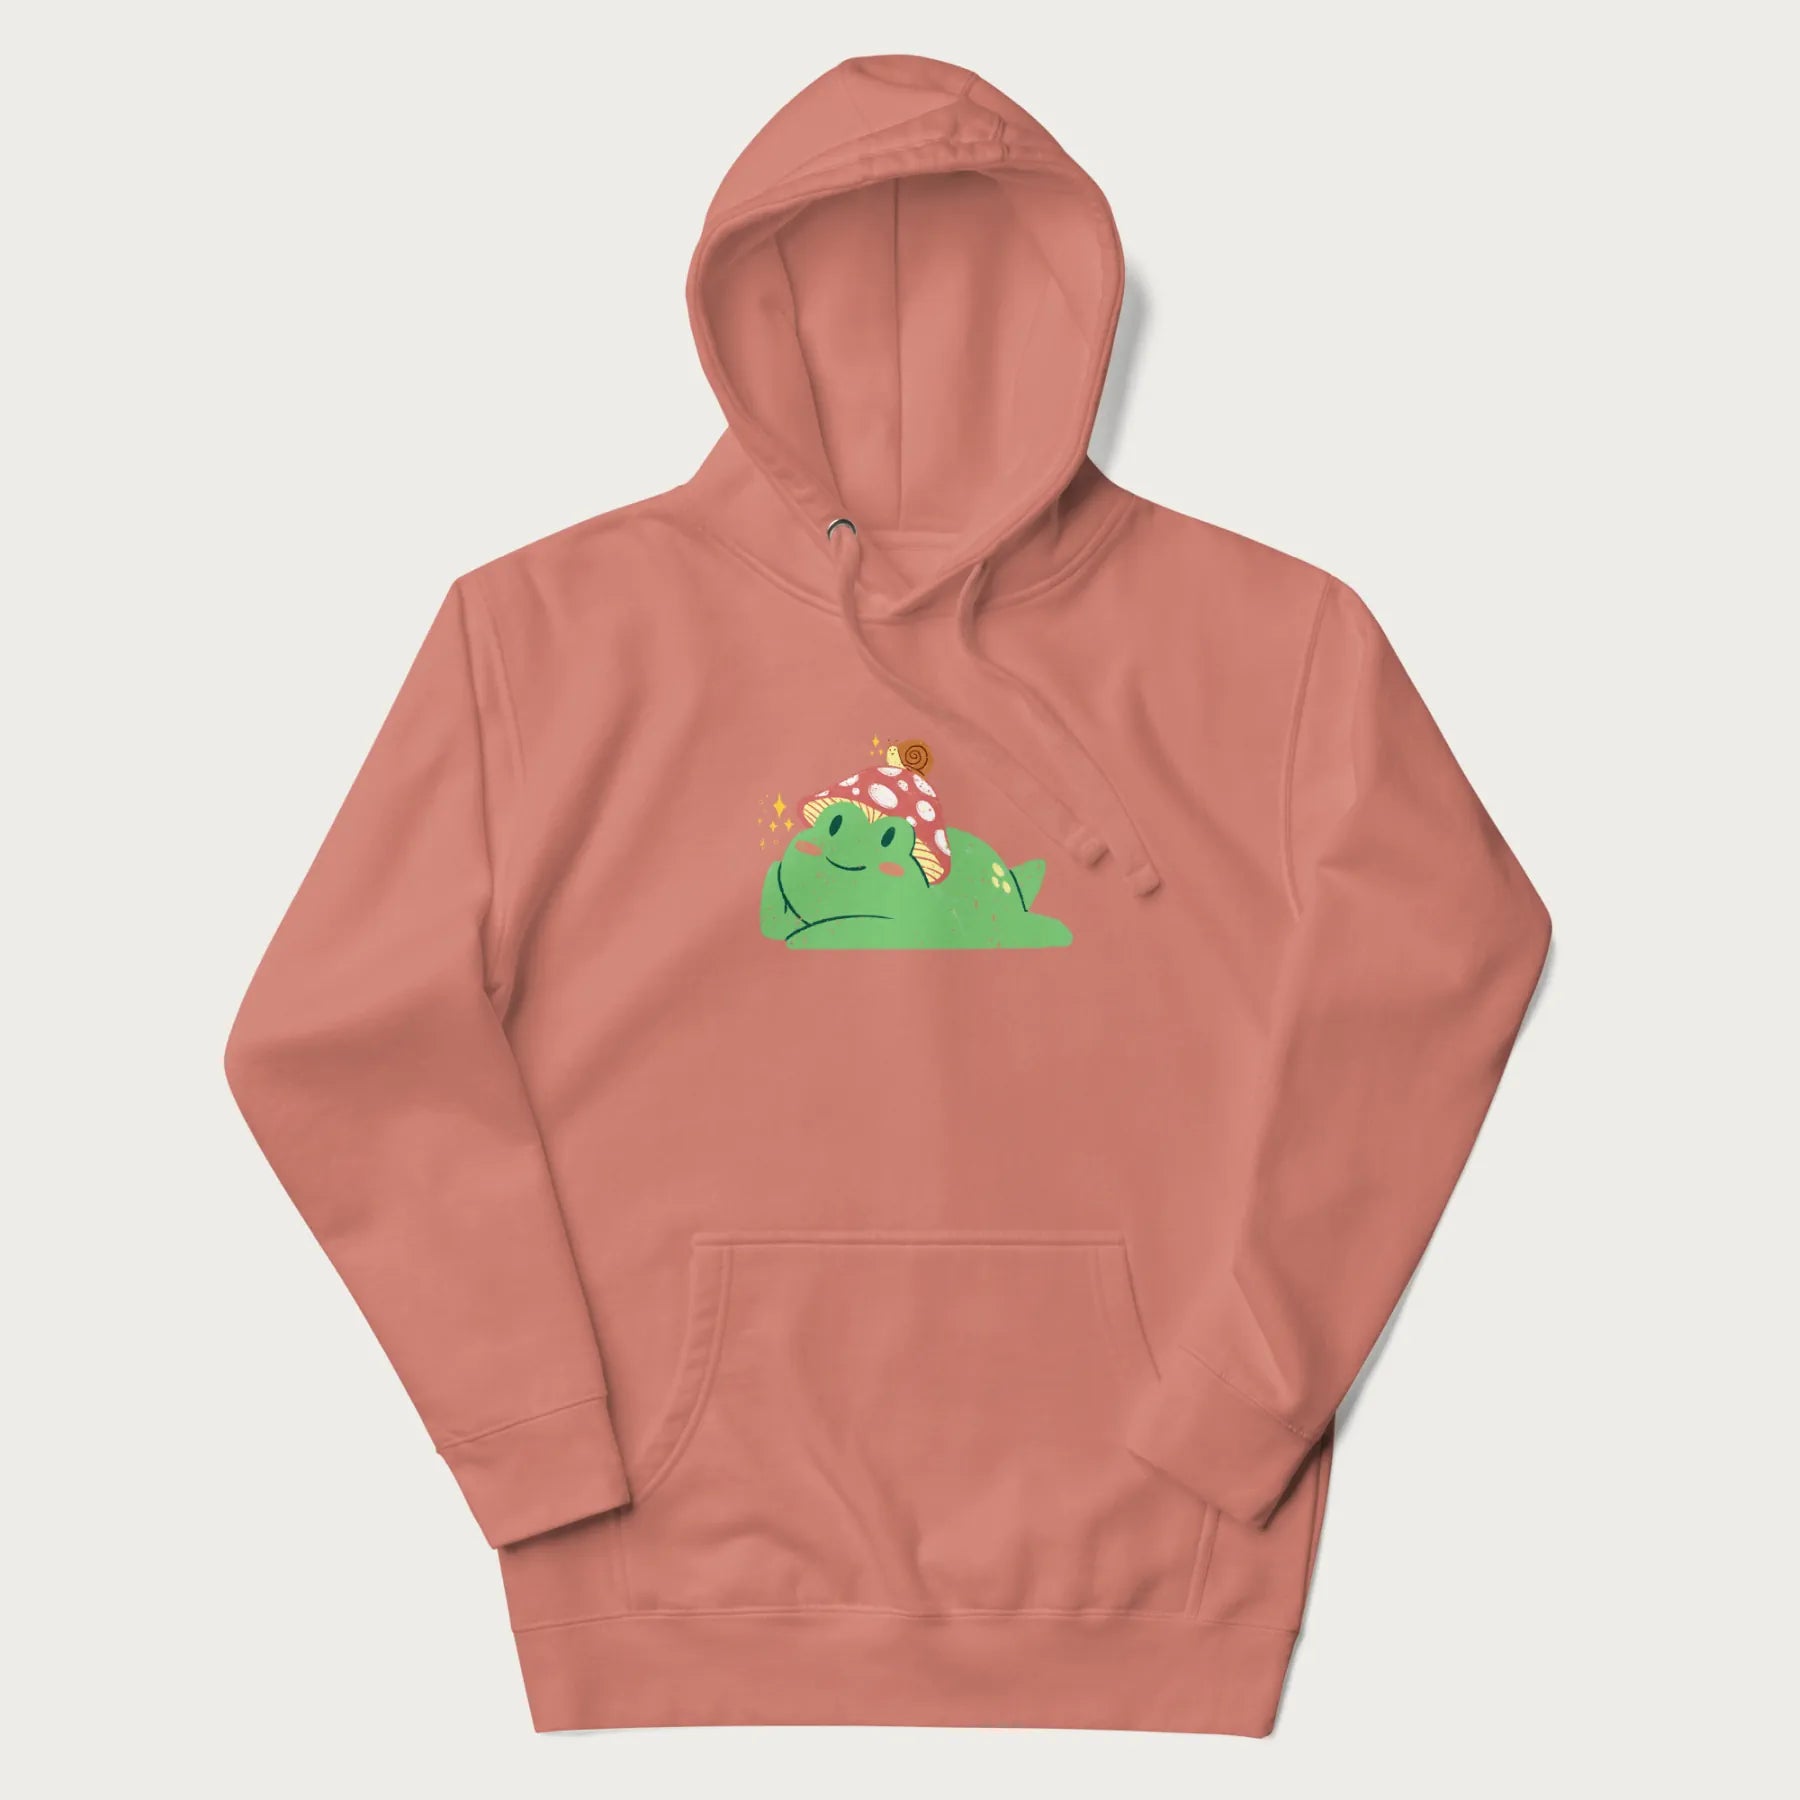 Light pink hoodie with a cottagecore design of a green frog wearing a mushroom cap and a snail on top.